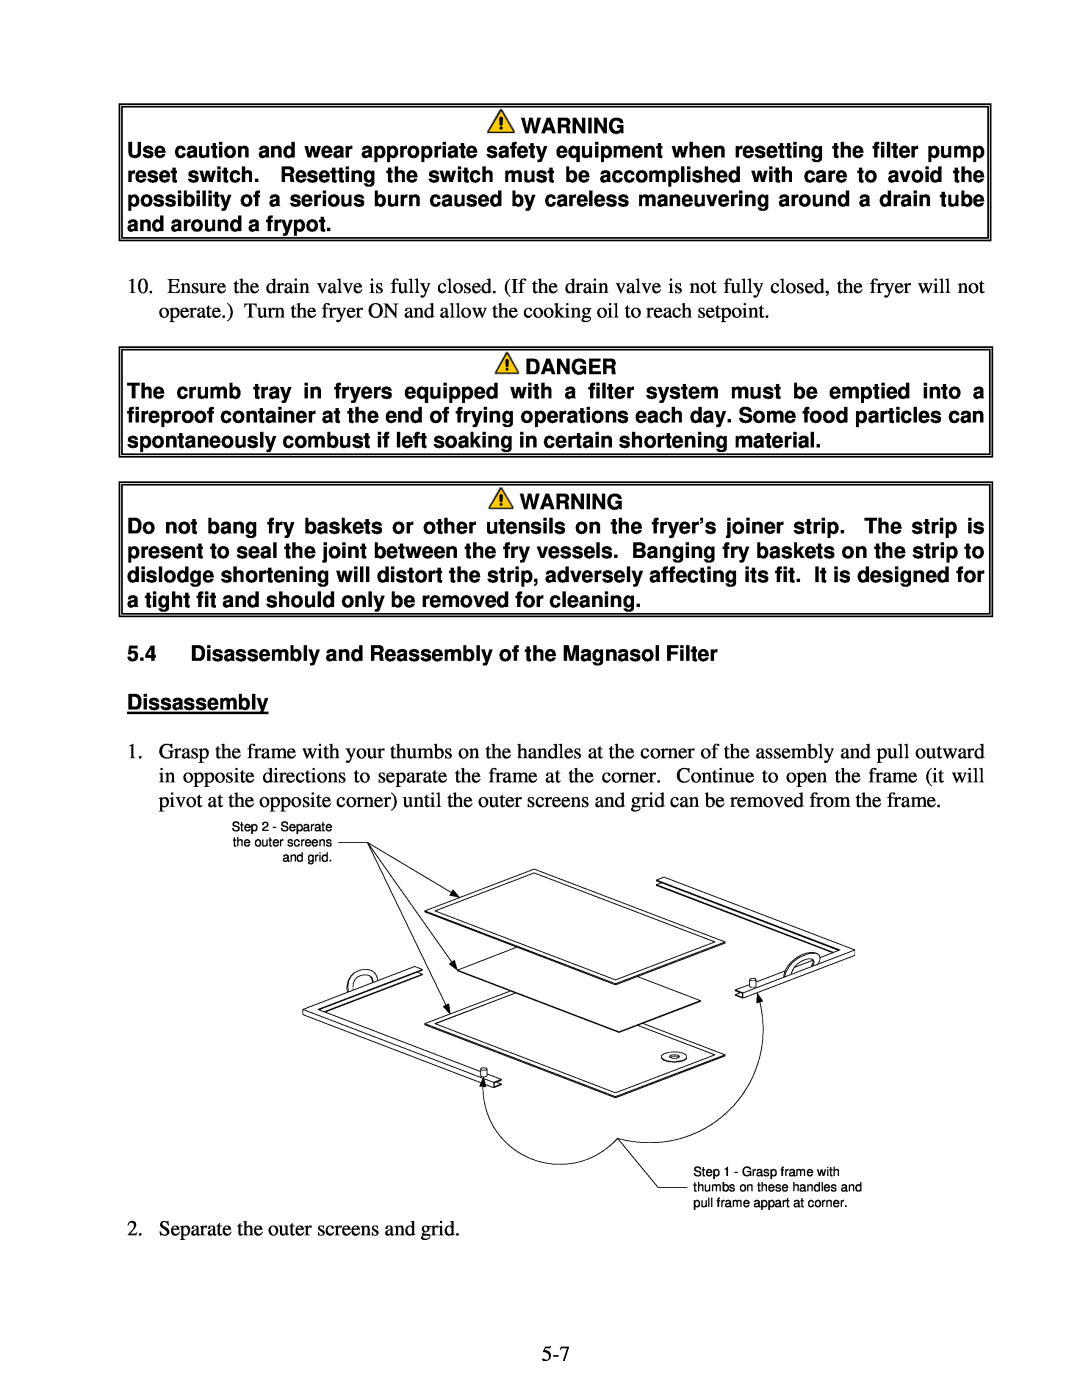 Frymaster 8196339 operation manual Disassembly and Reassembly of the Magnasol Filter Dissassembly, Danger 